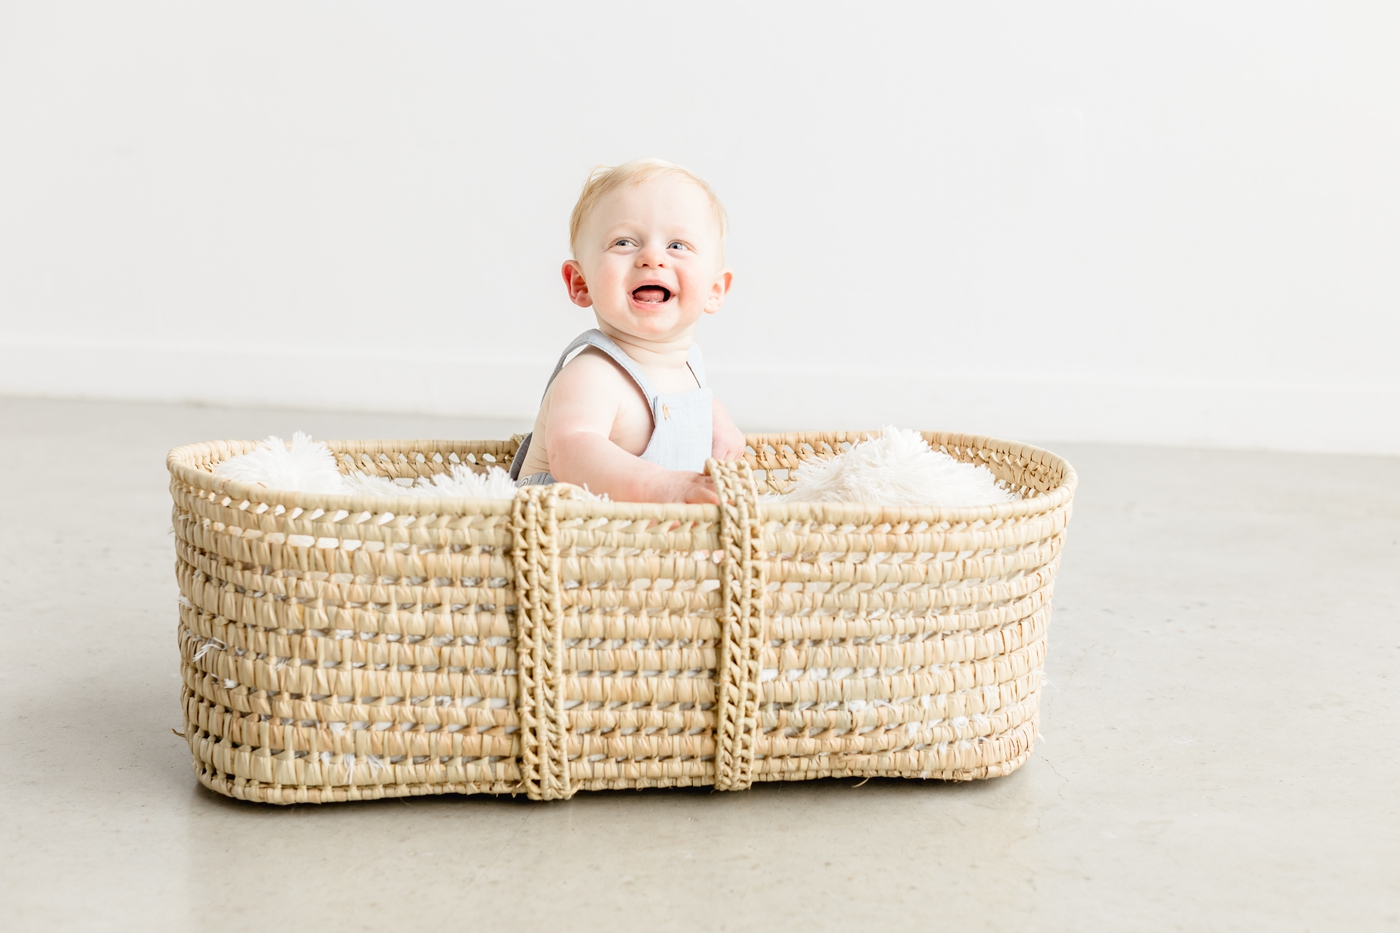 First birthday session with happy baby as he sits in moses basket. Photo by Sana Ahmed Photography.